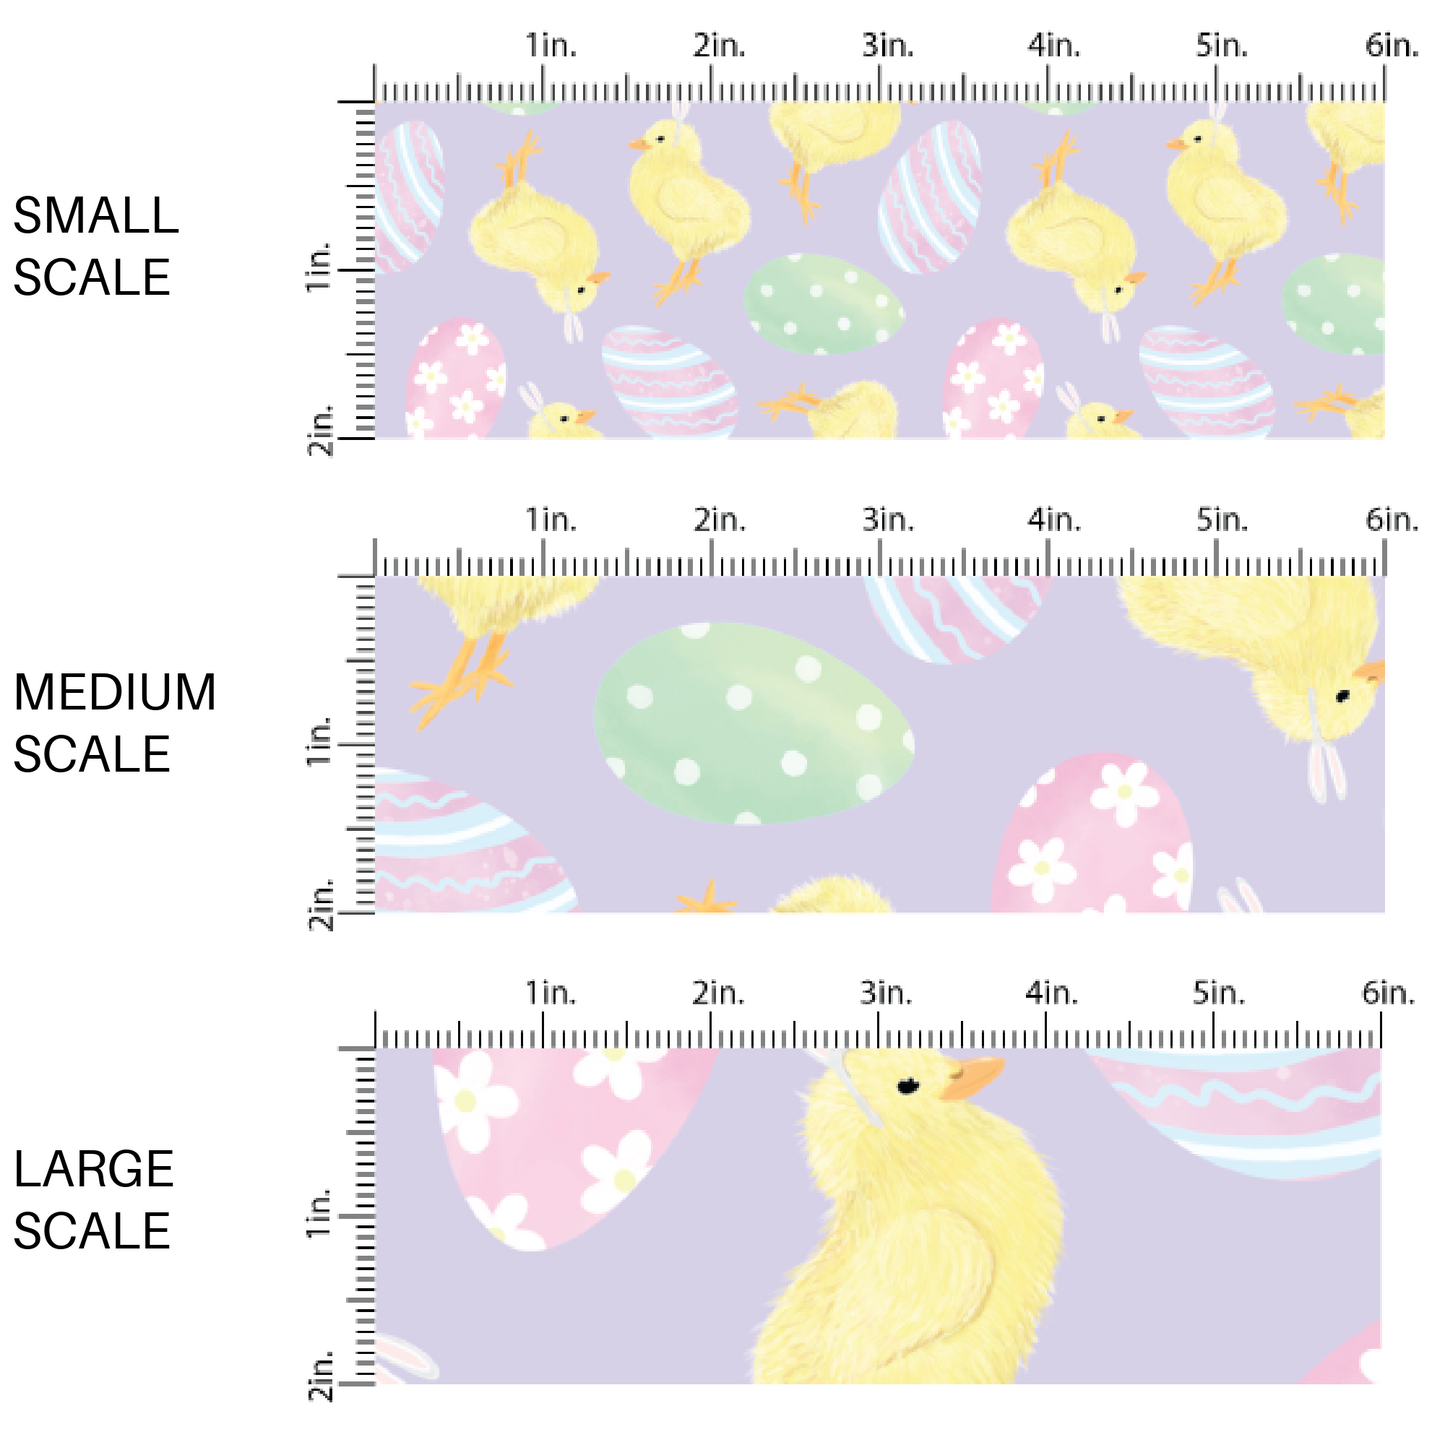 Yellow Chicks and Designed Easter Eggs on Lavender Purple Fabric by the Yard scaled image guide.